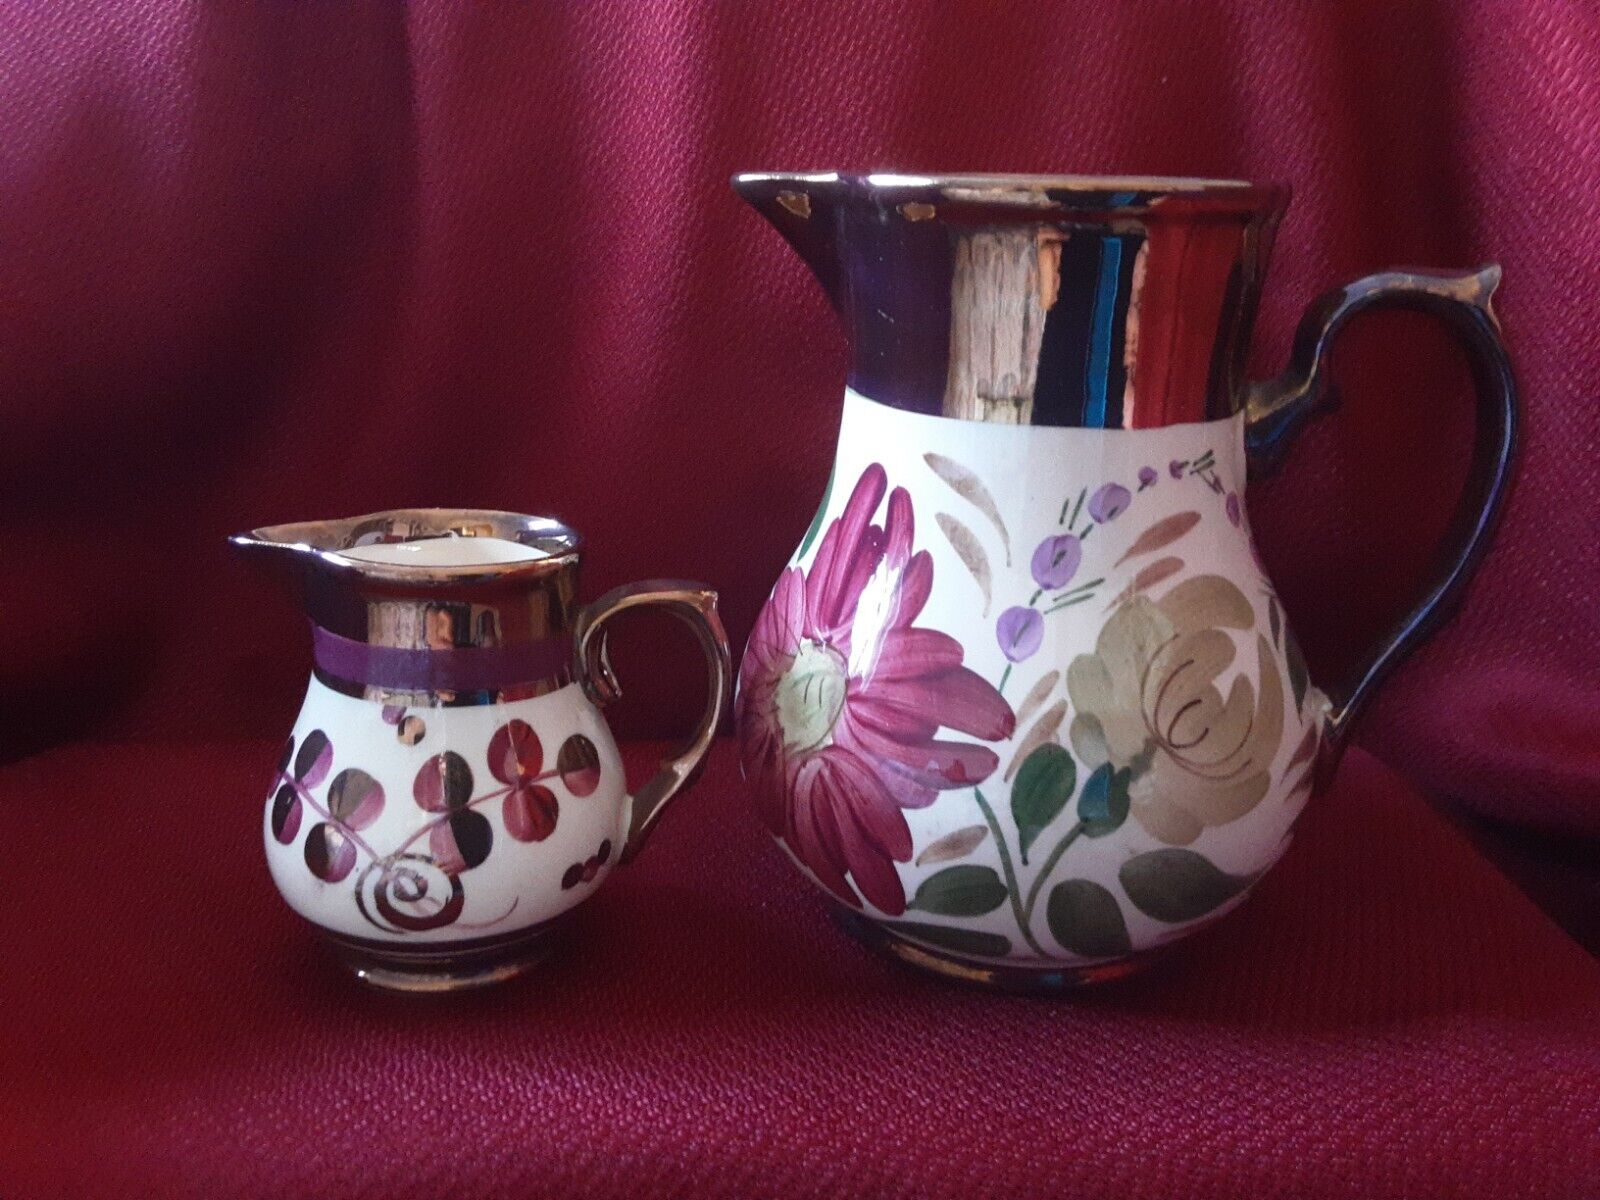 Vintage Harvest Ware Pitcher Wade Handpainted England. Lot Of 2 Pieces. 